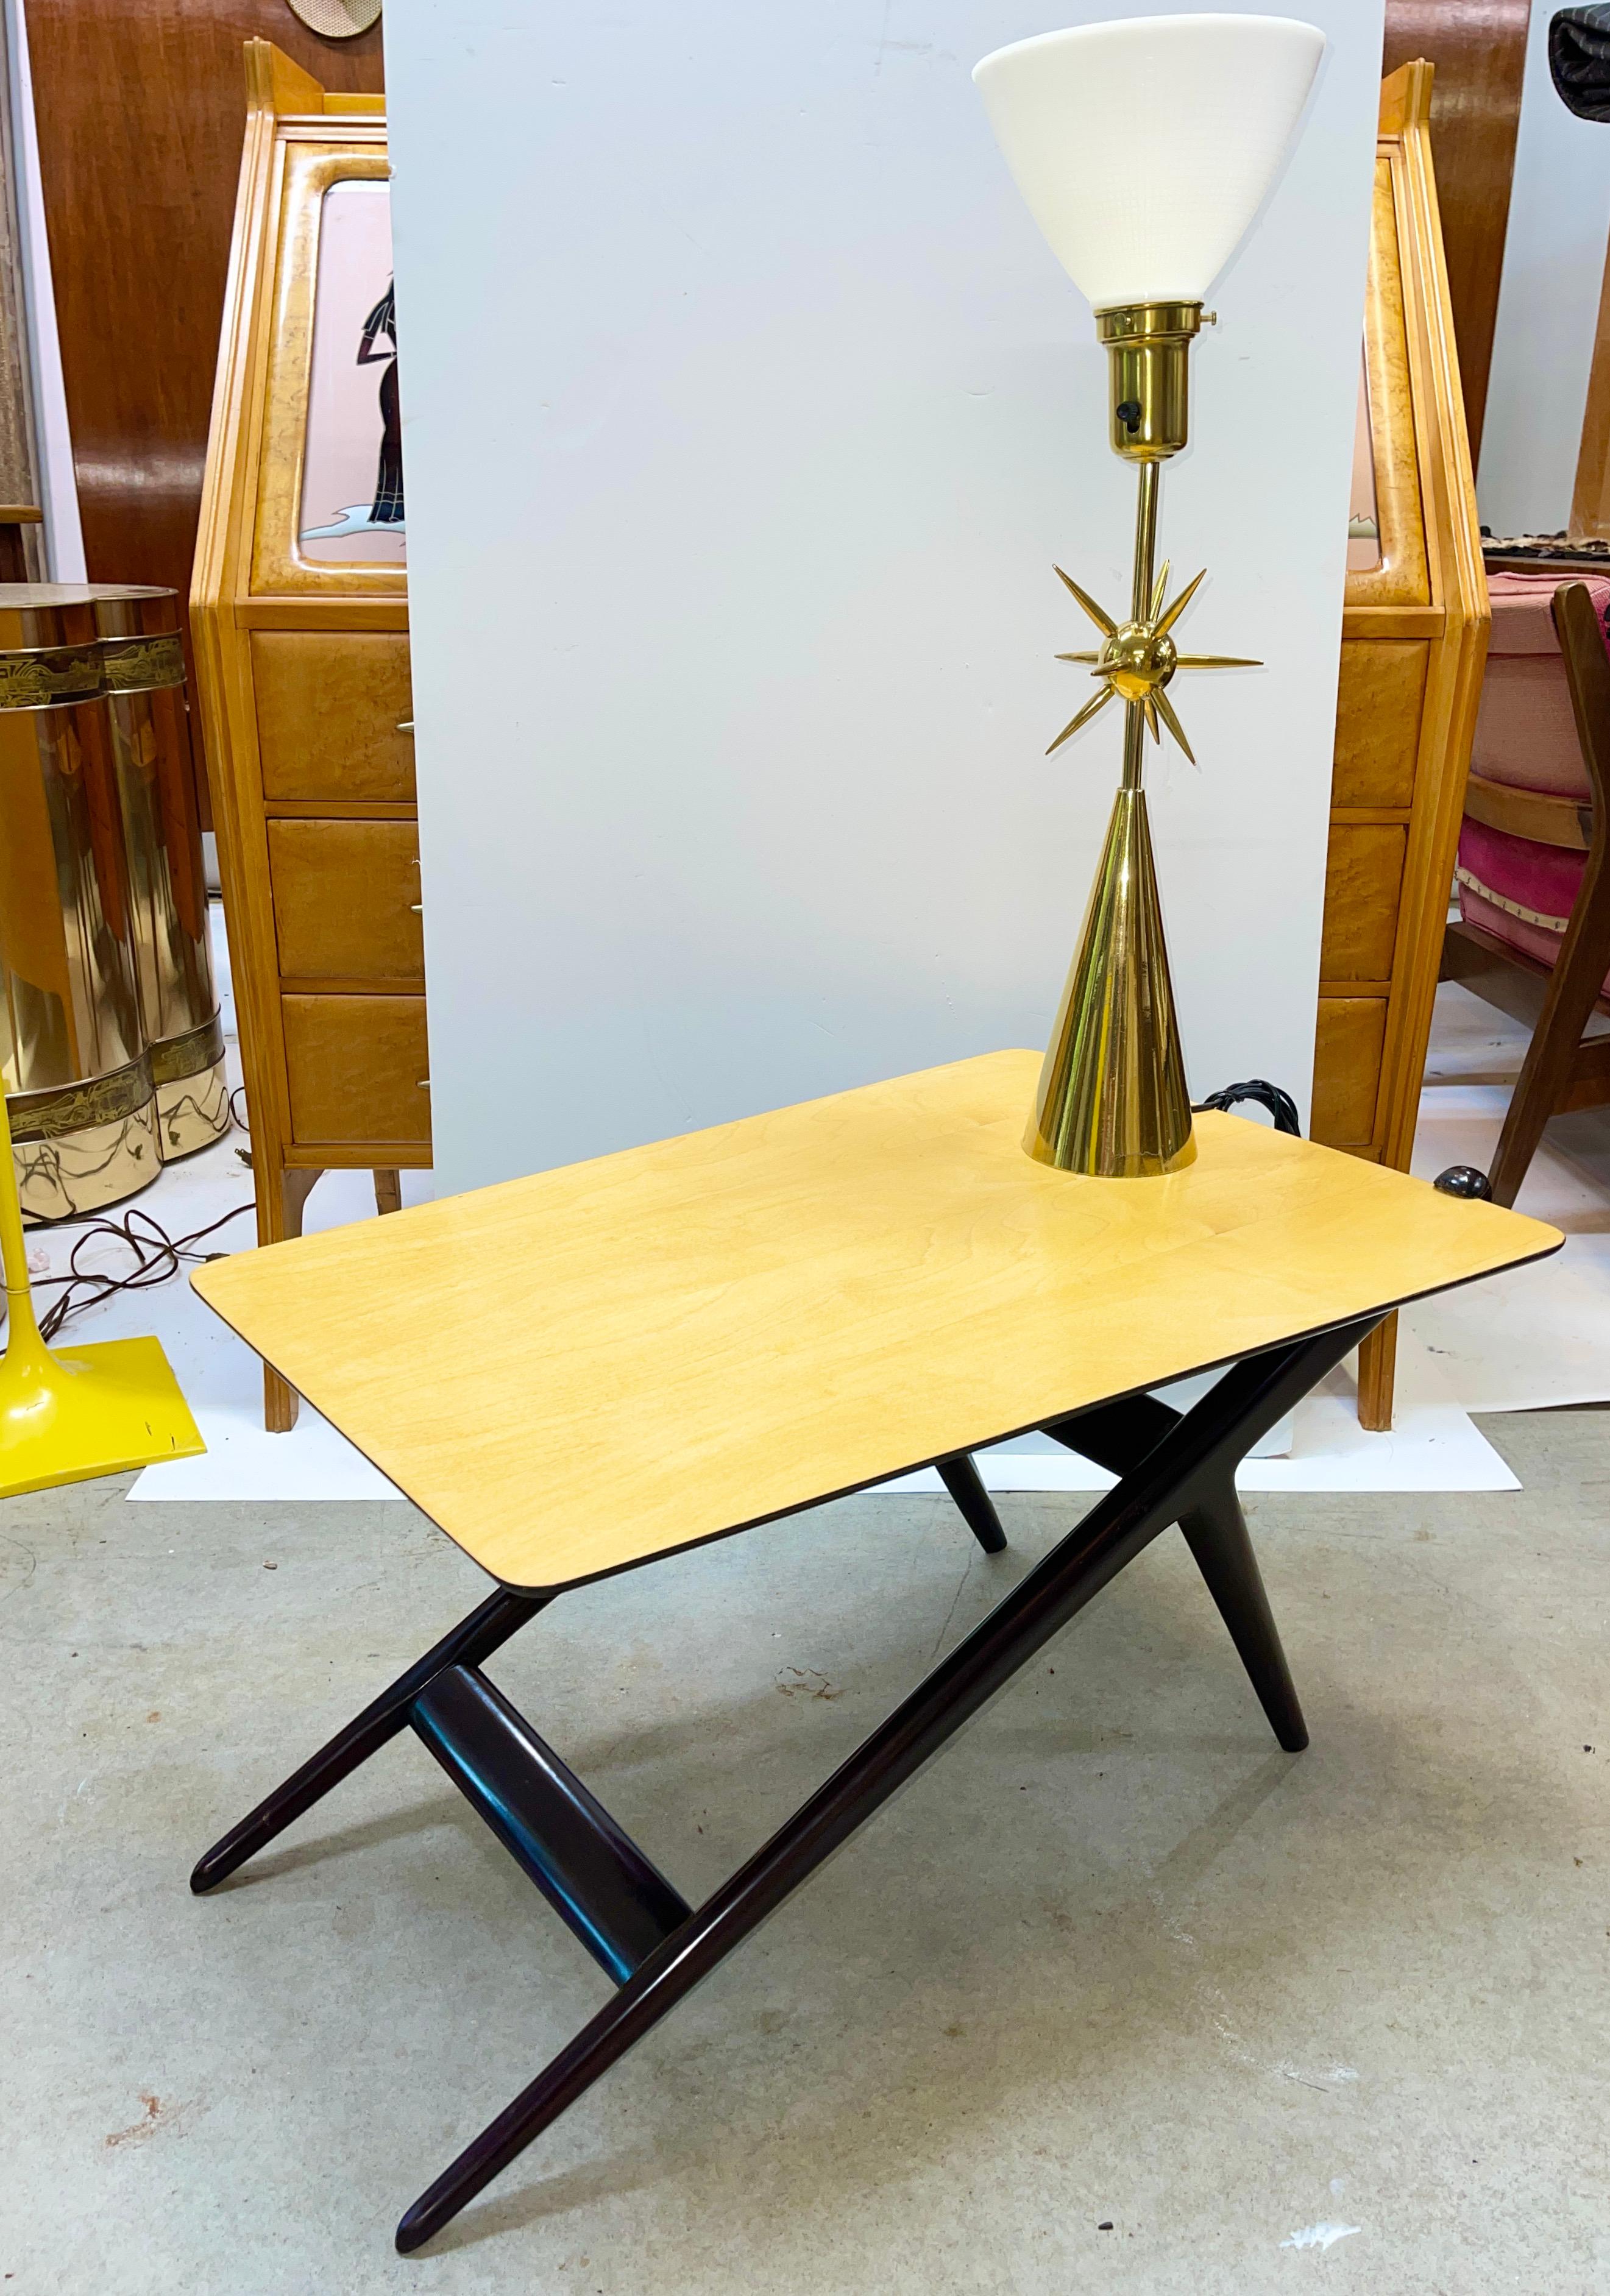 ISA Bergamo Ebonized Cocktail Table In Good Condition For Sale In Hanover, MA